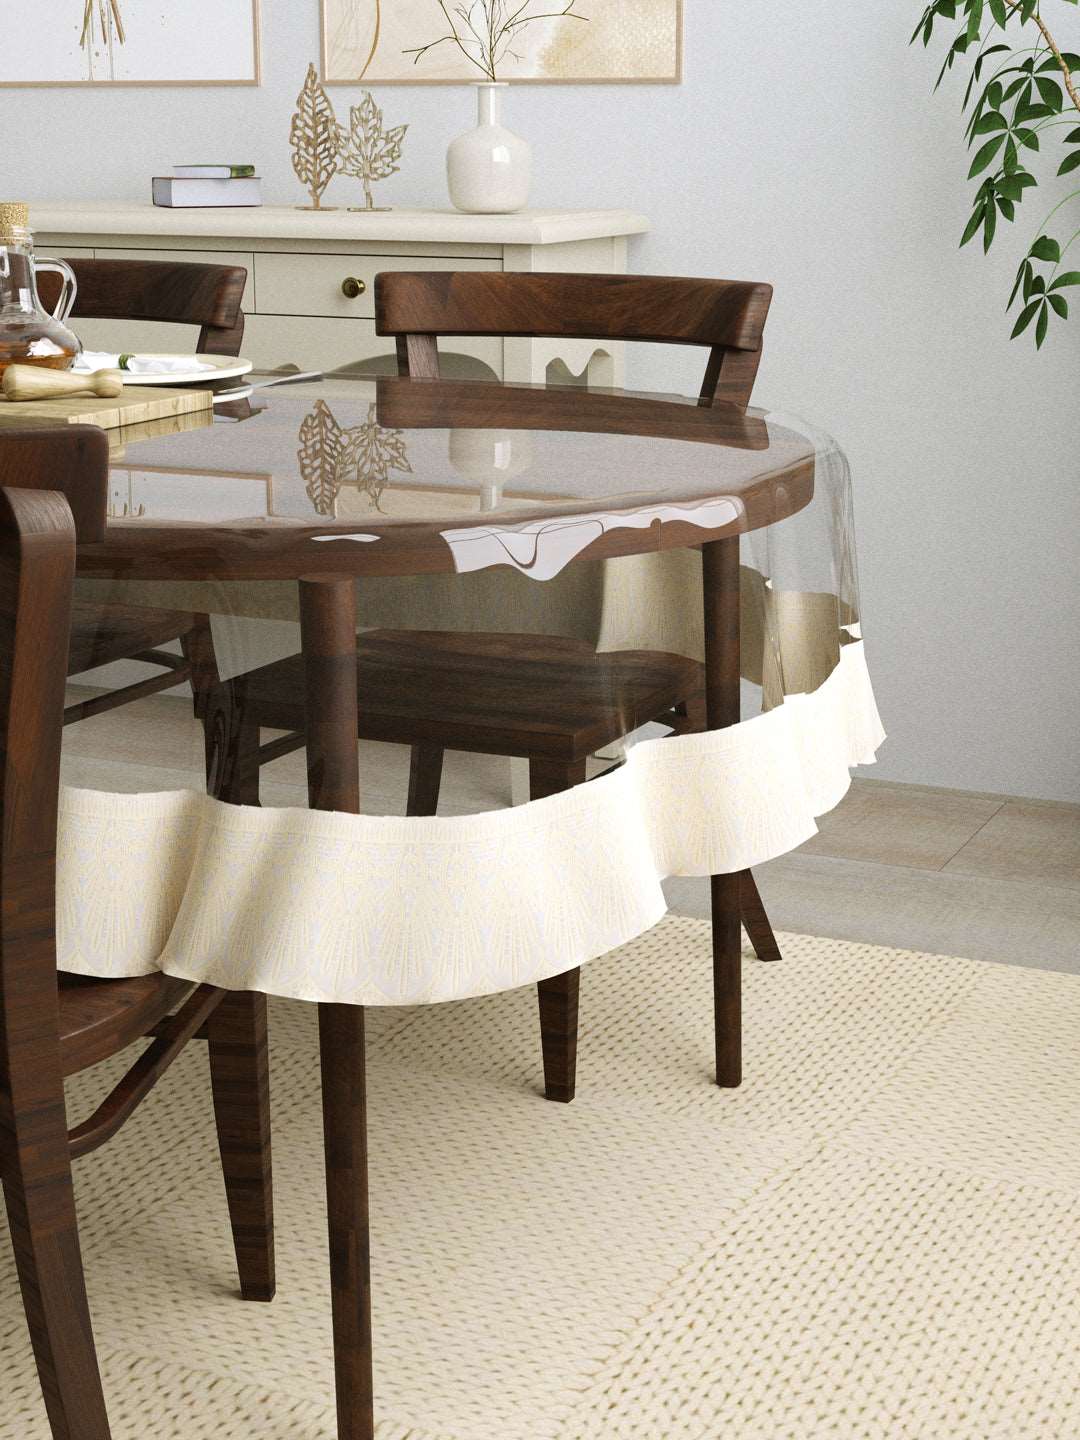 4 Seater Anti Slip Oval Transparent Table Cover 54x78 Inches ; Cream Lace